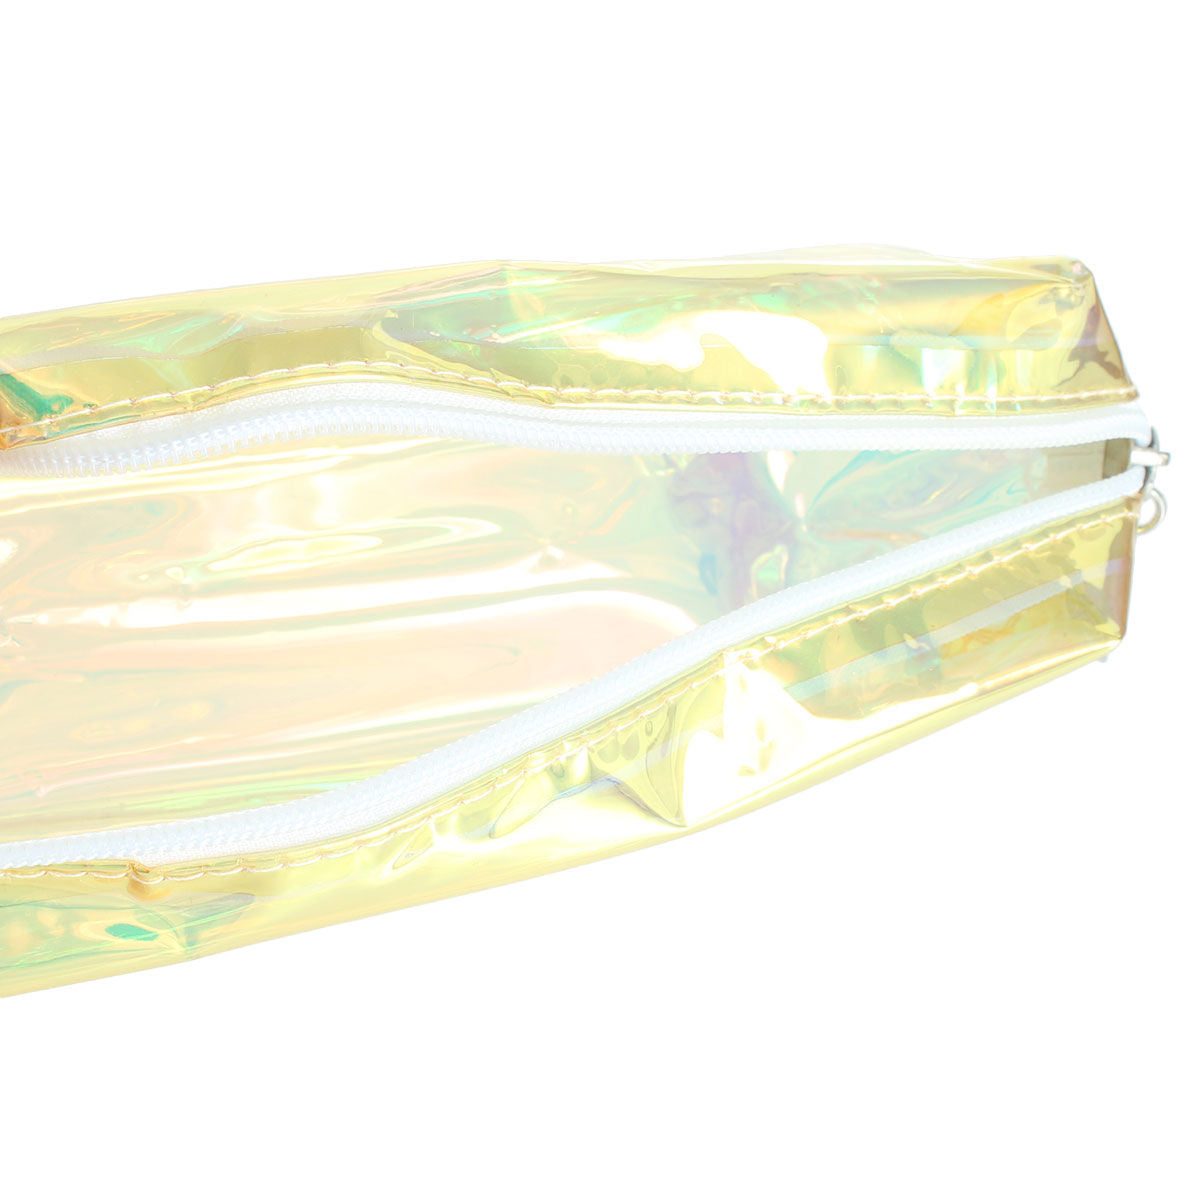 Gold Shiny Transparent Cosmetic Pouch